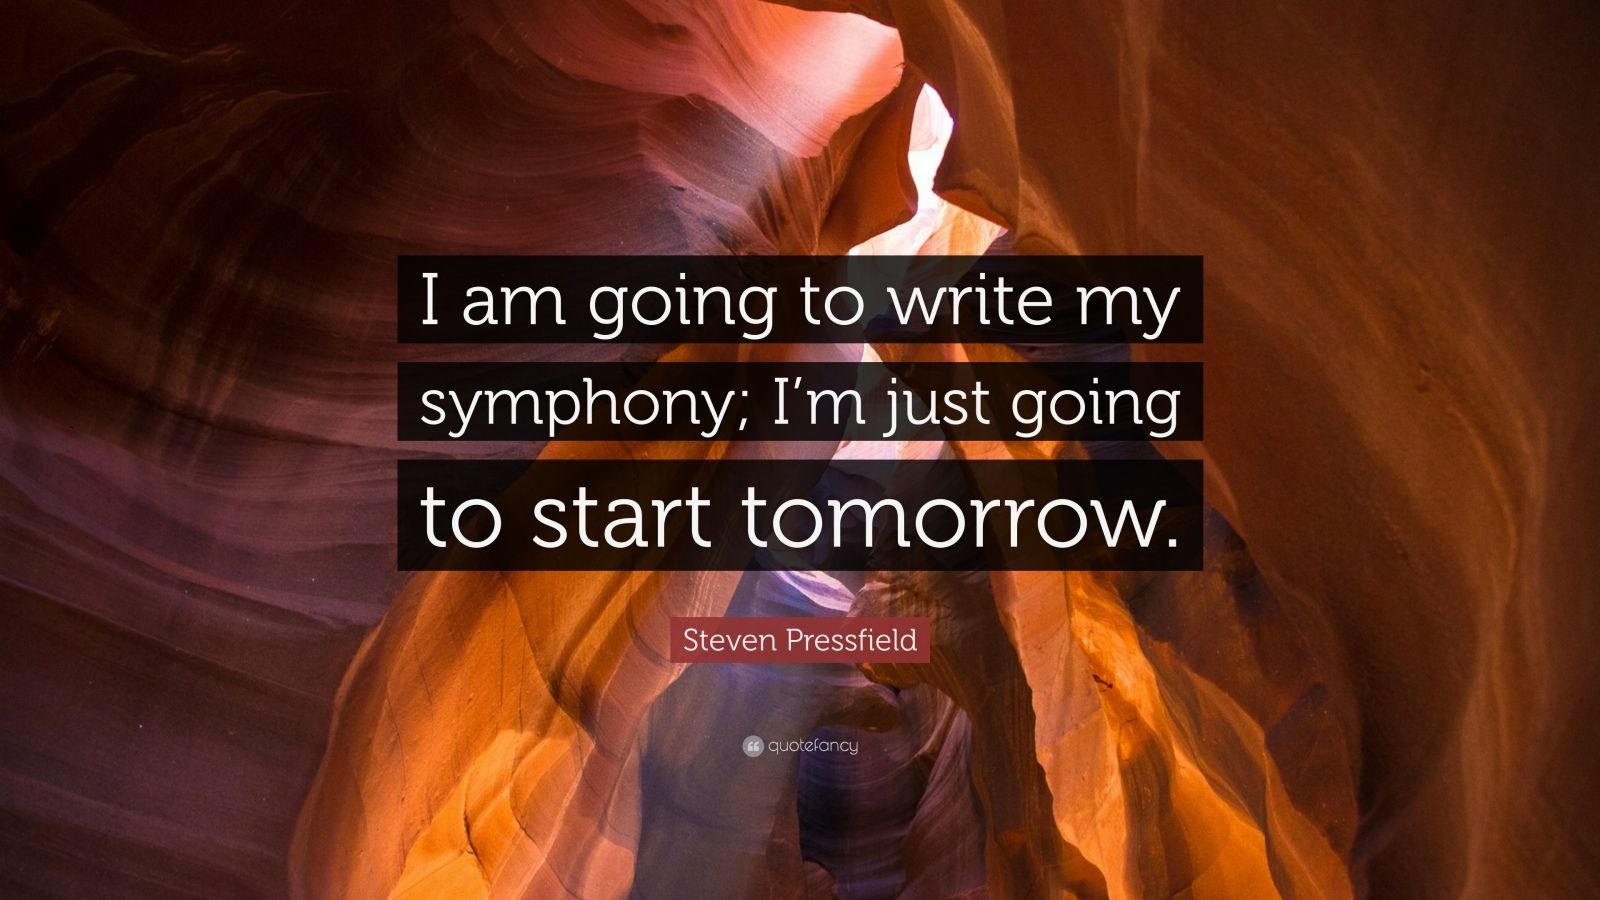 Weekly Quote: Steven Pressfield on Starting your Symphony — 24 Letters